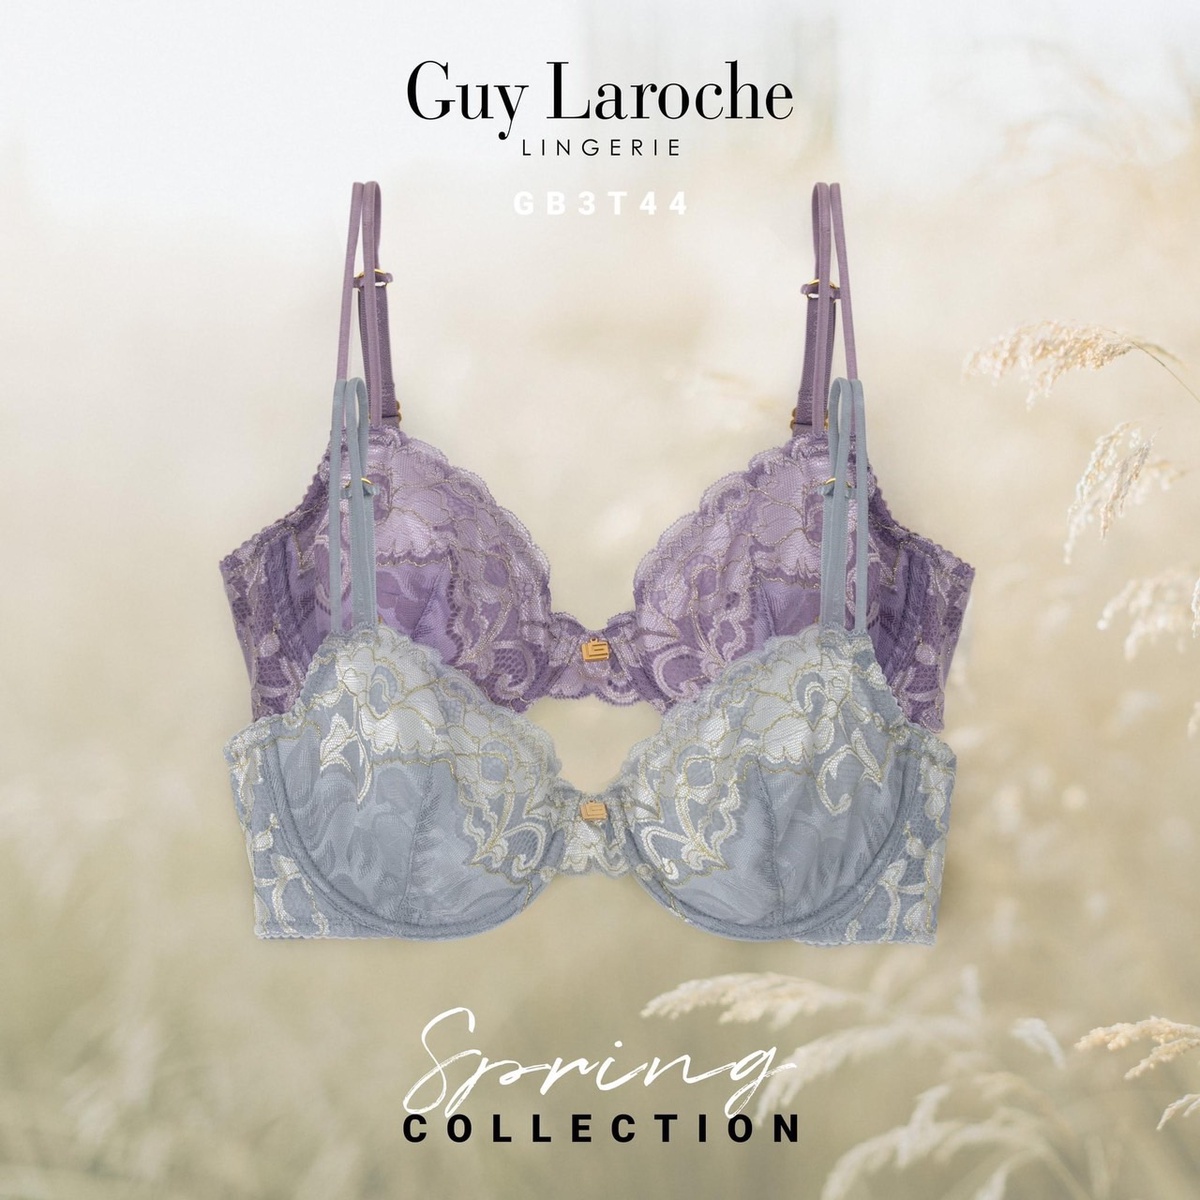 Guy Laroche Lingerie Spring Collection